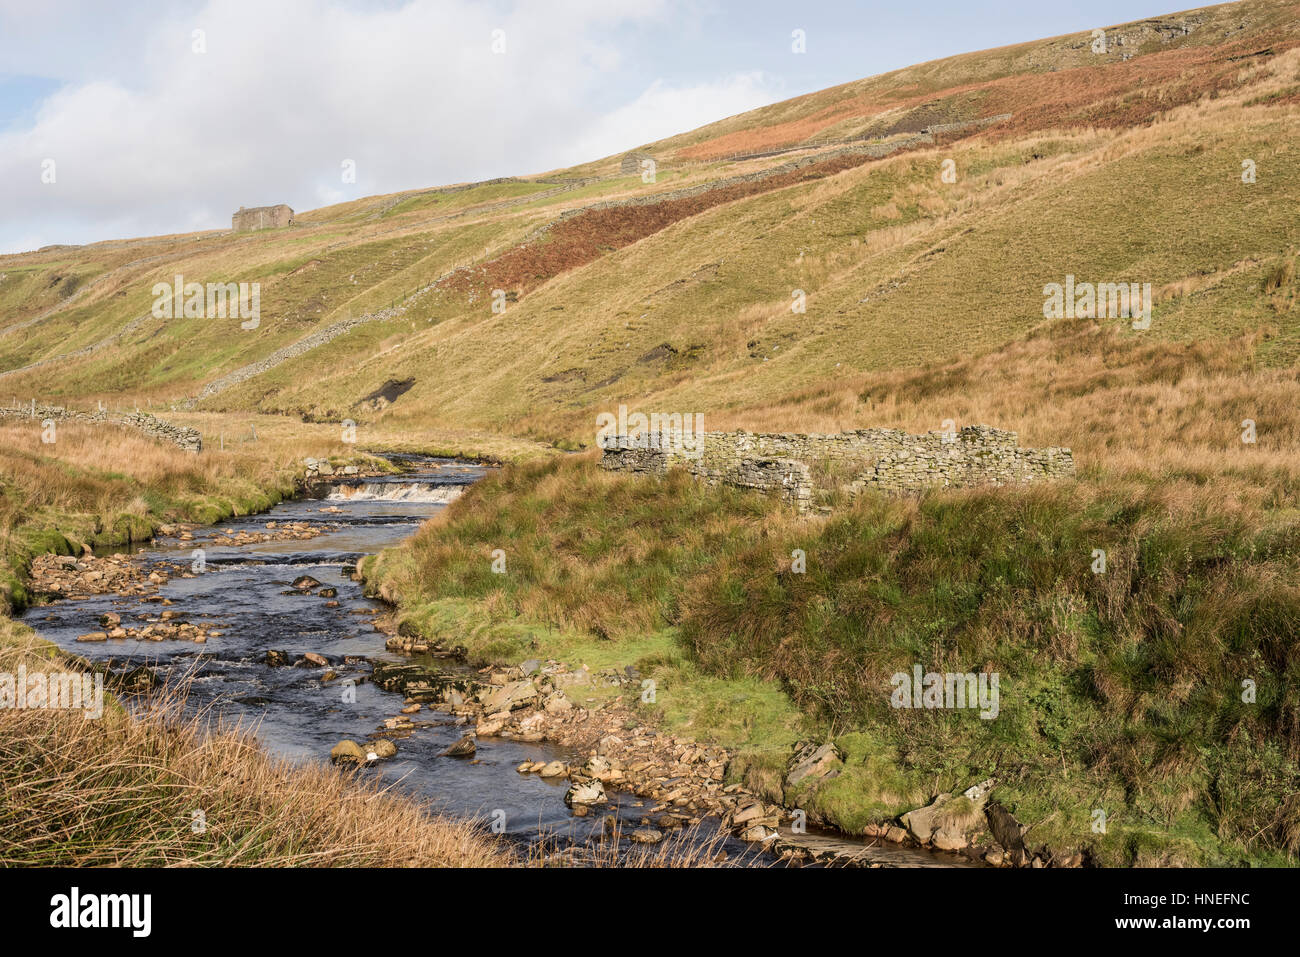 Sheepfold by Birkdale Beck, Birkdale, Yorkshire Dales. Also showing a barn on the hillside and common land Stock Photo